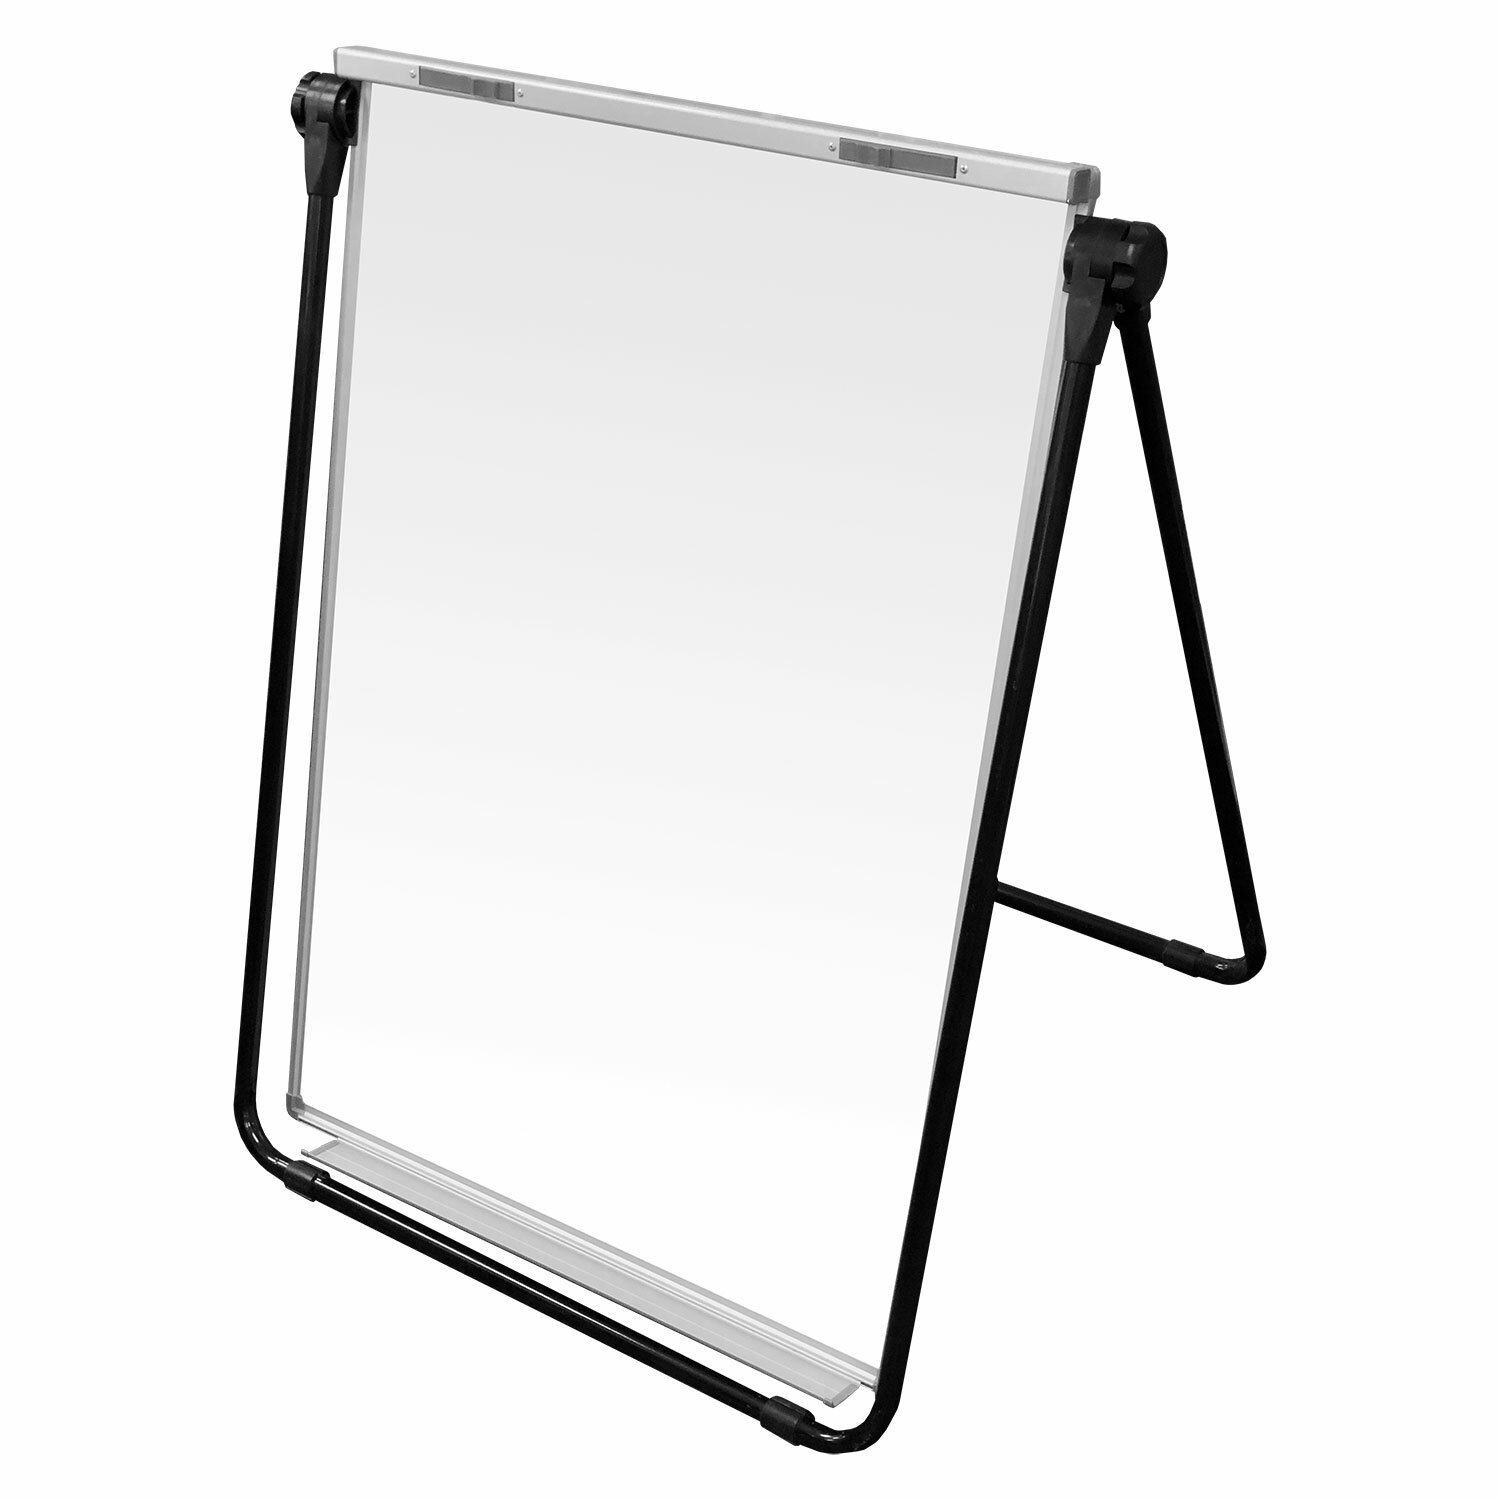 Dry Erase Surface Table Top Free Standing A2 Folding Wedge Whiteboard Mobile Foldable with Carry Handle Dry Wipe Landscape Grey & Red Magnetic Double-Sided Excellent for The Office